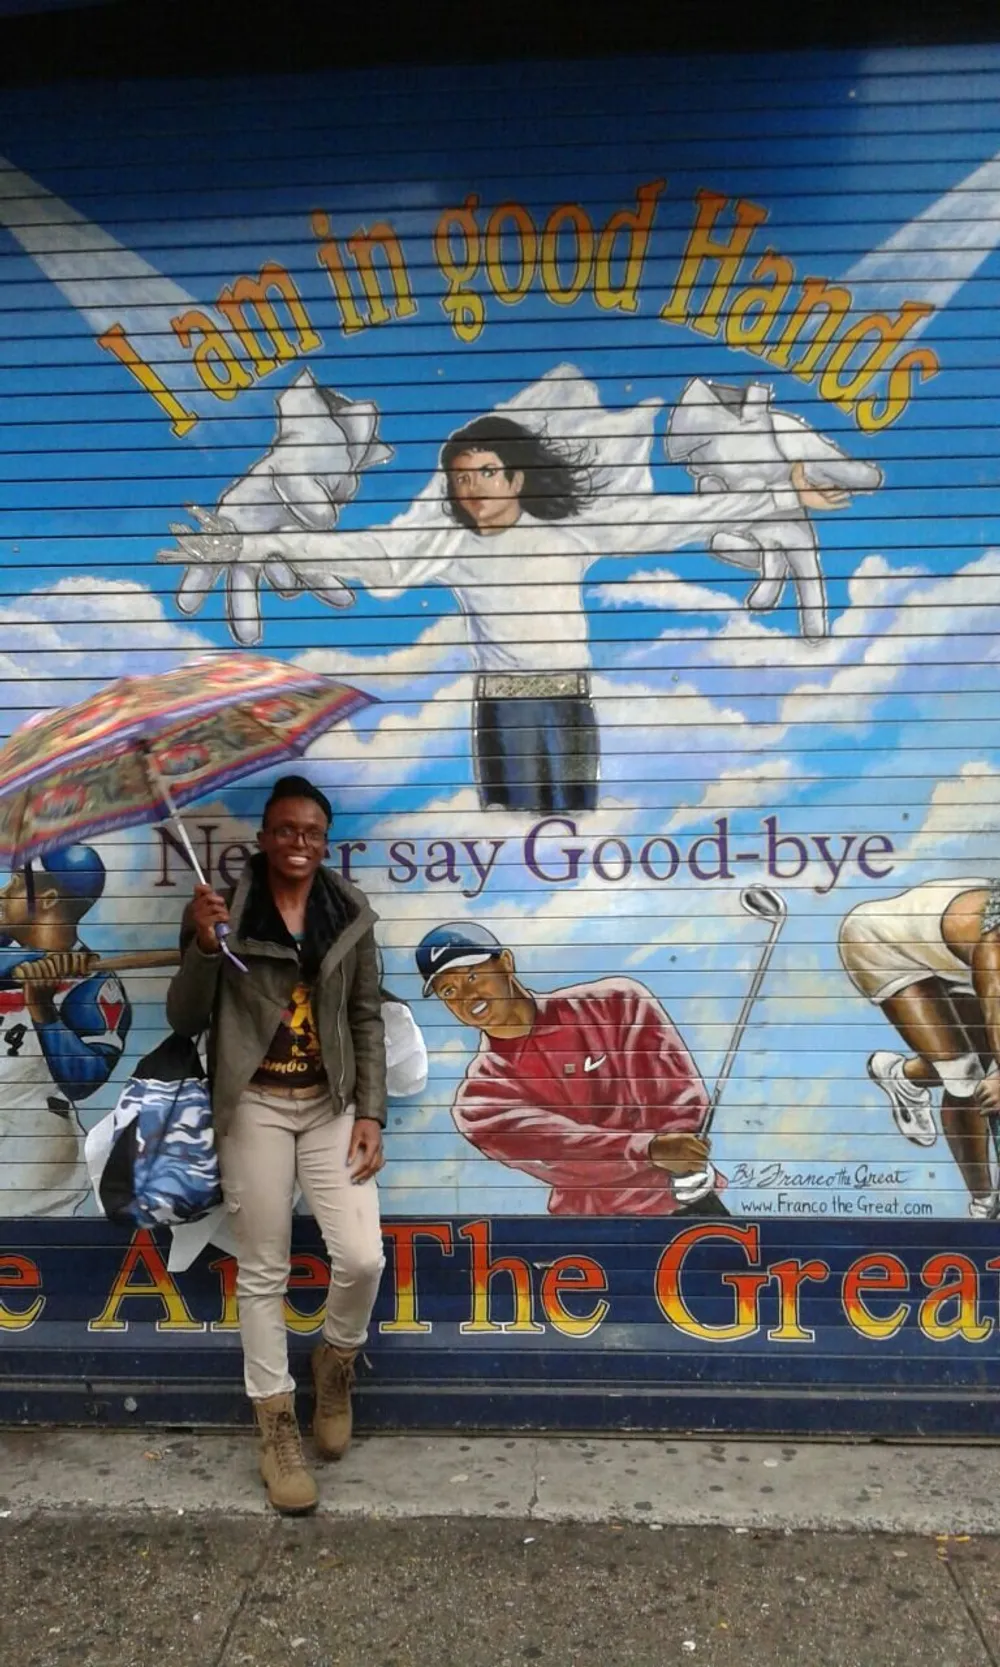 A person is standing in front of a colorful mural that states I am in good Hands and Never say Good-bye featuring various figures and the artists signature Franco the Great